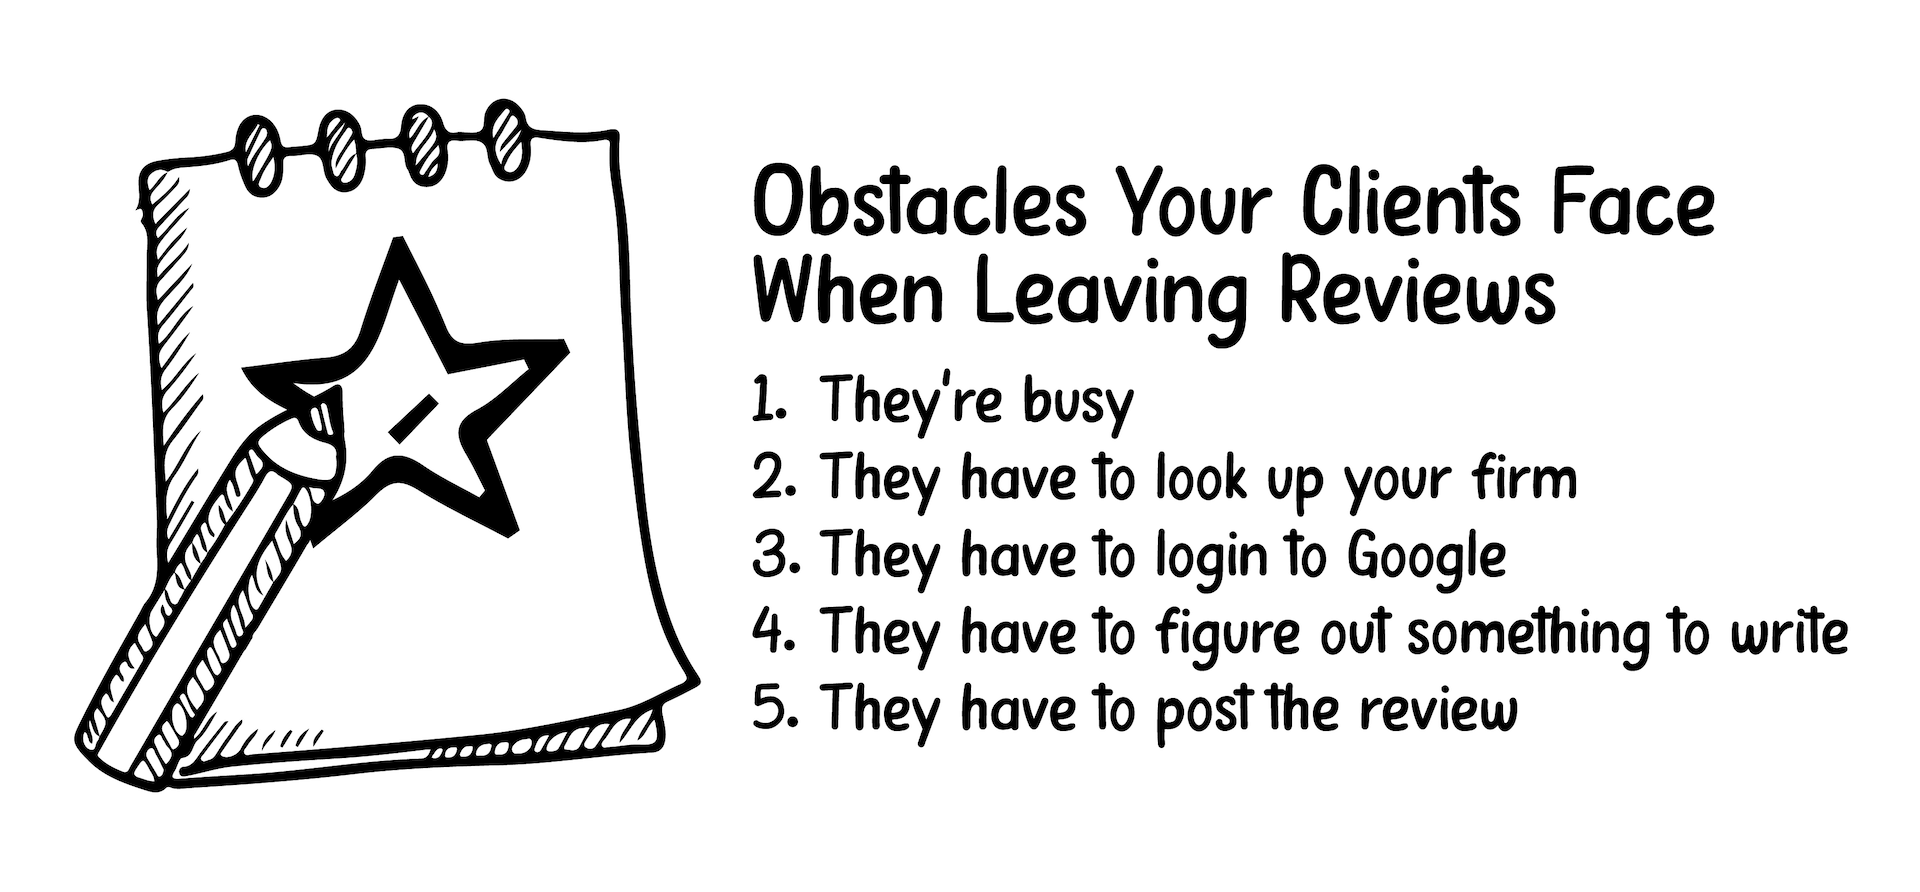 How To Get More Law Firm Reviews in 2022